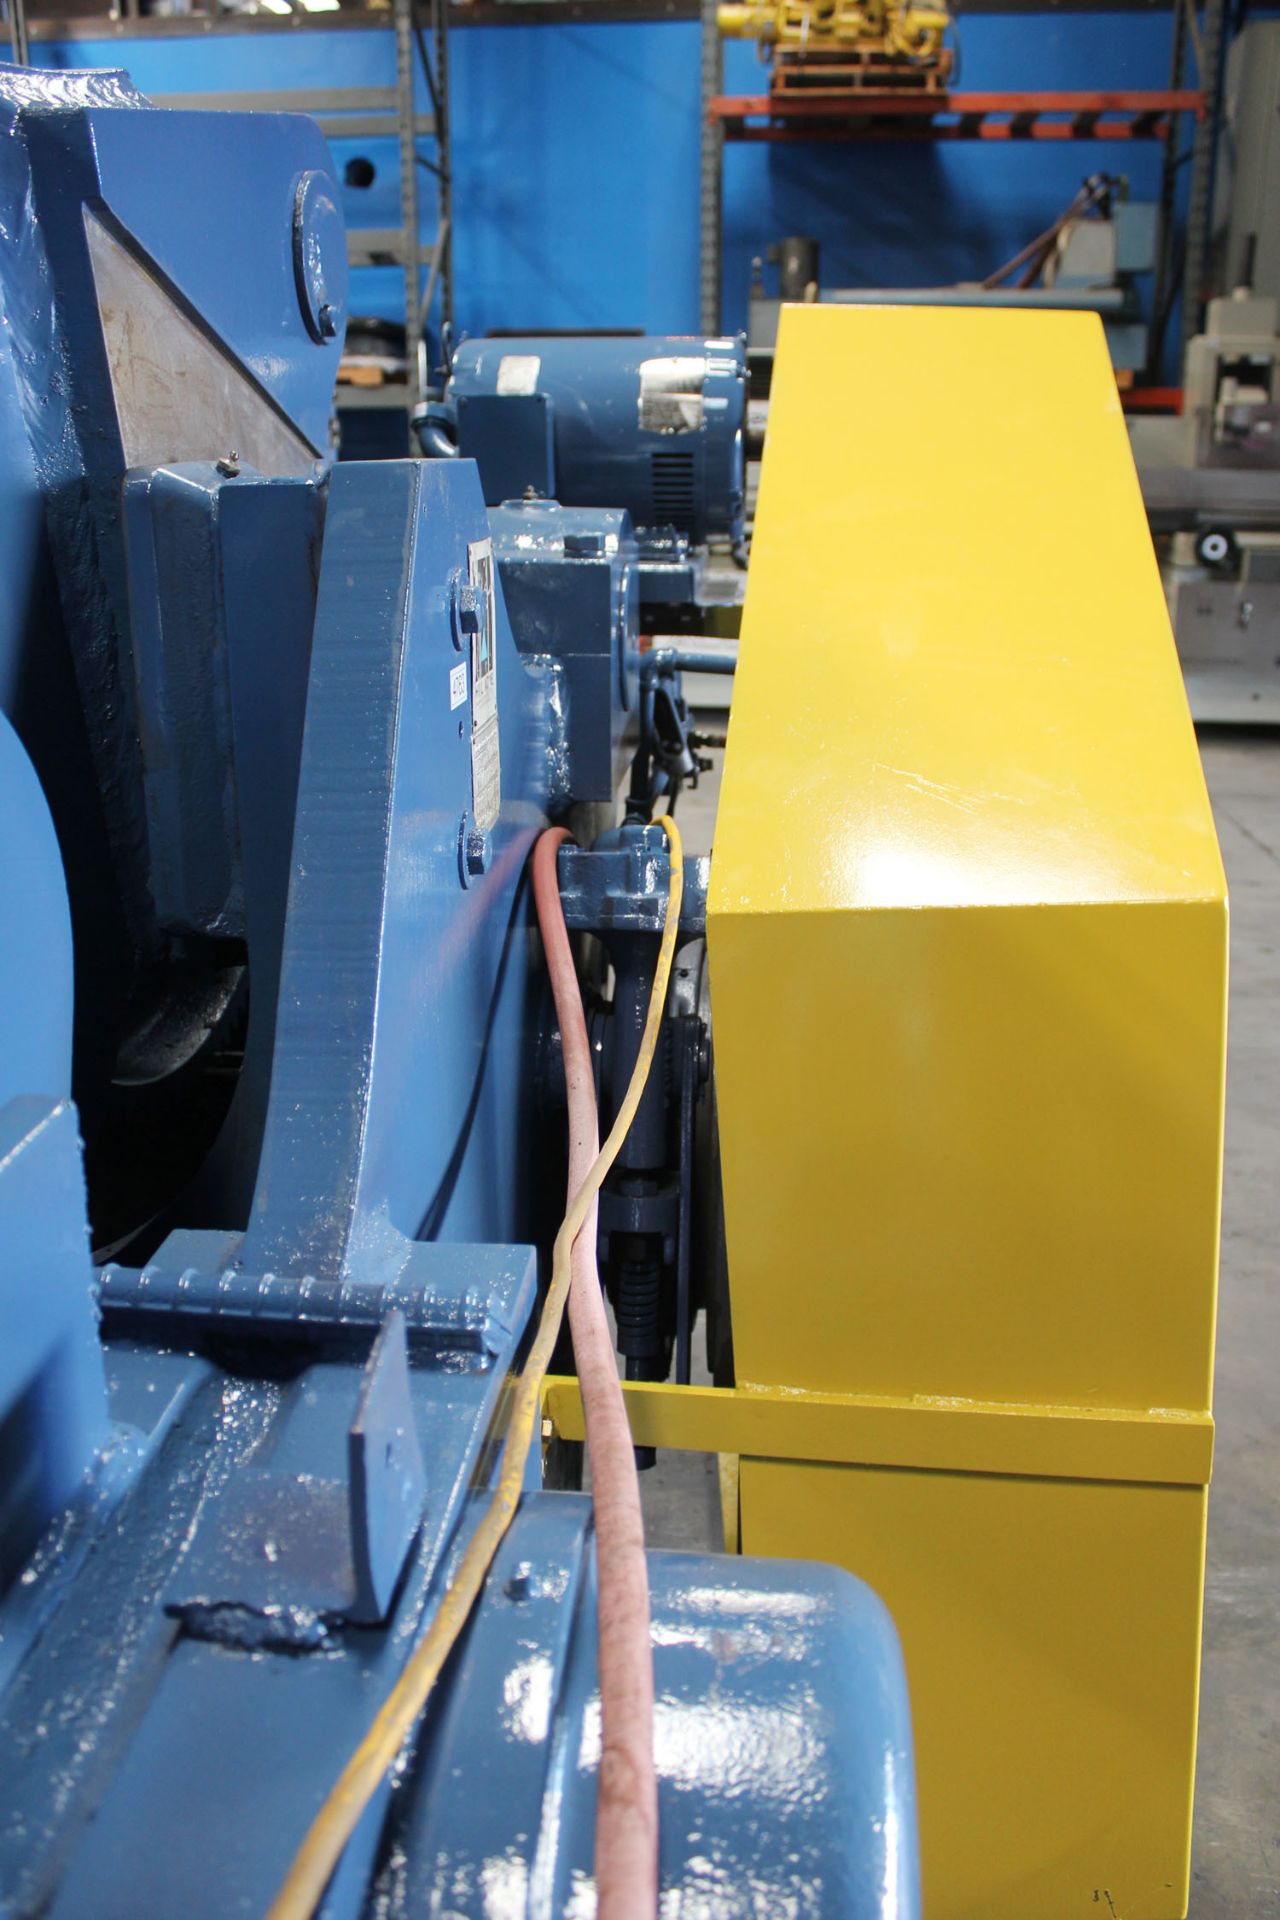 Hill Acme Alligator Shear | 24", Mdl: 22 A, S/N: N/A, Located In: Huntington Park, CA - 4763 - Image 4 of 18